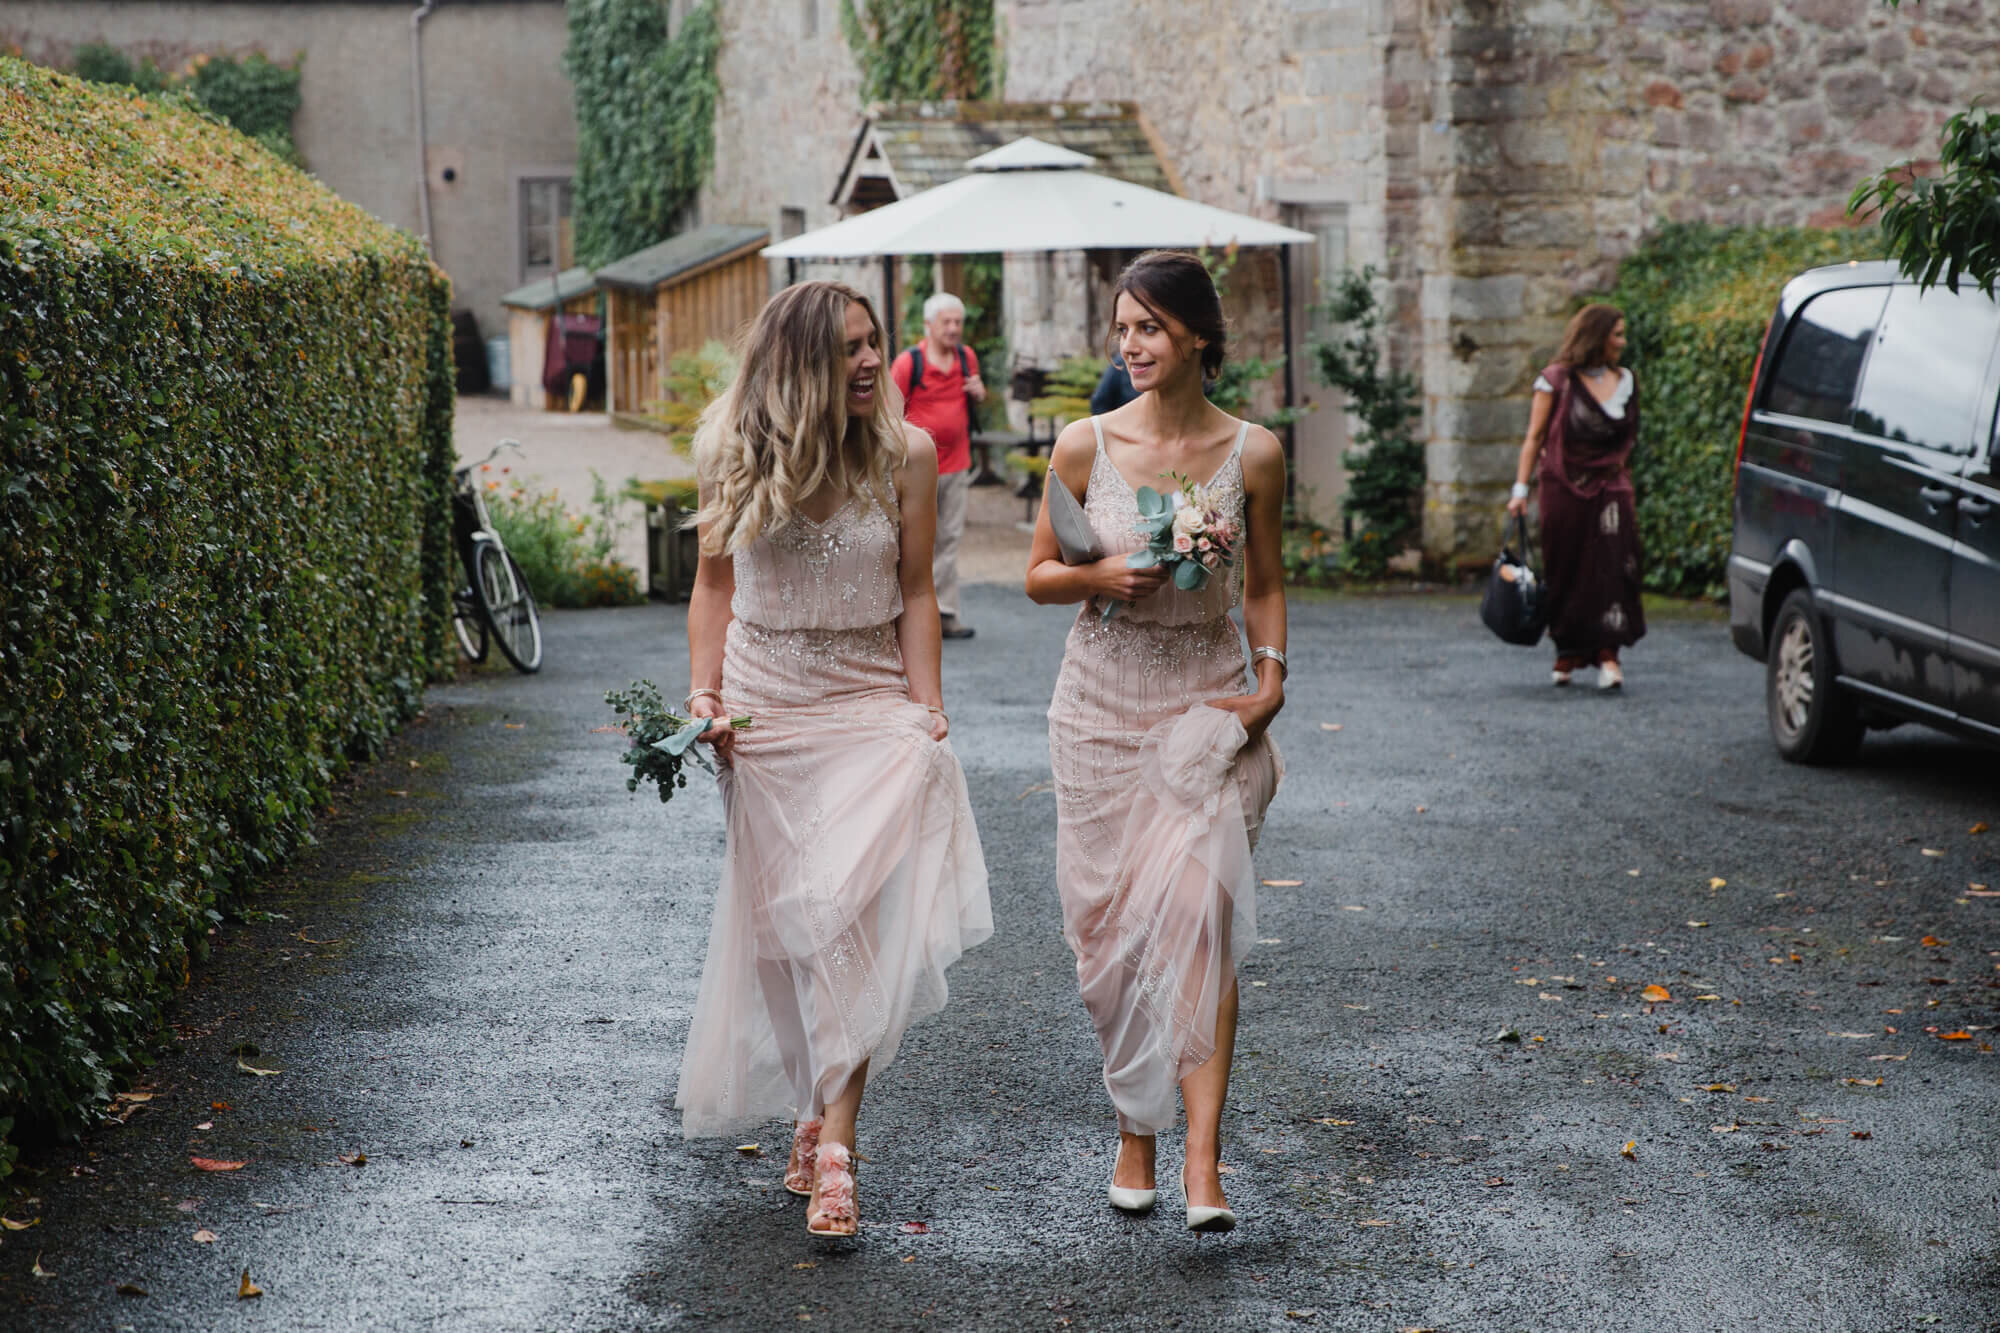 bridesmaids sample cumbria weather while walking to ceremony